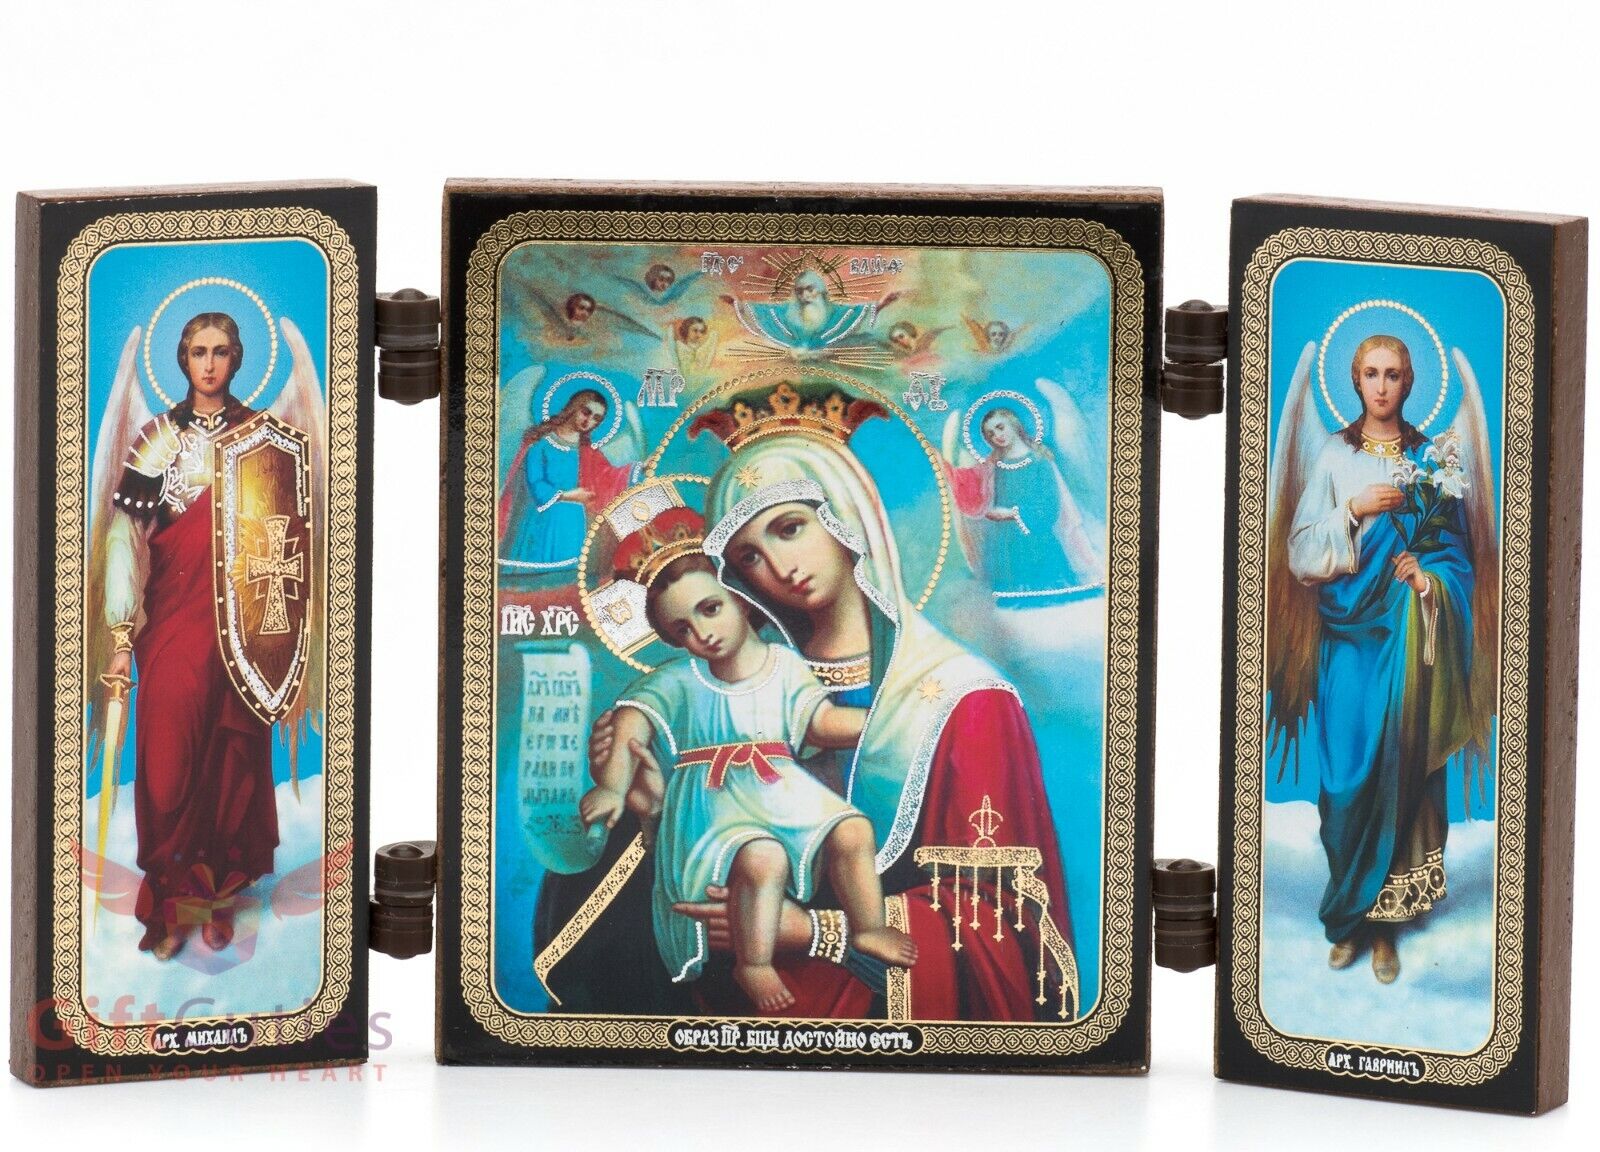 Folding Wooden Triptych Icon of Axion Estin Truly Meet Virgin Mary & Archangeles